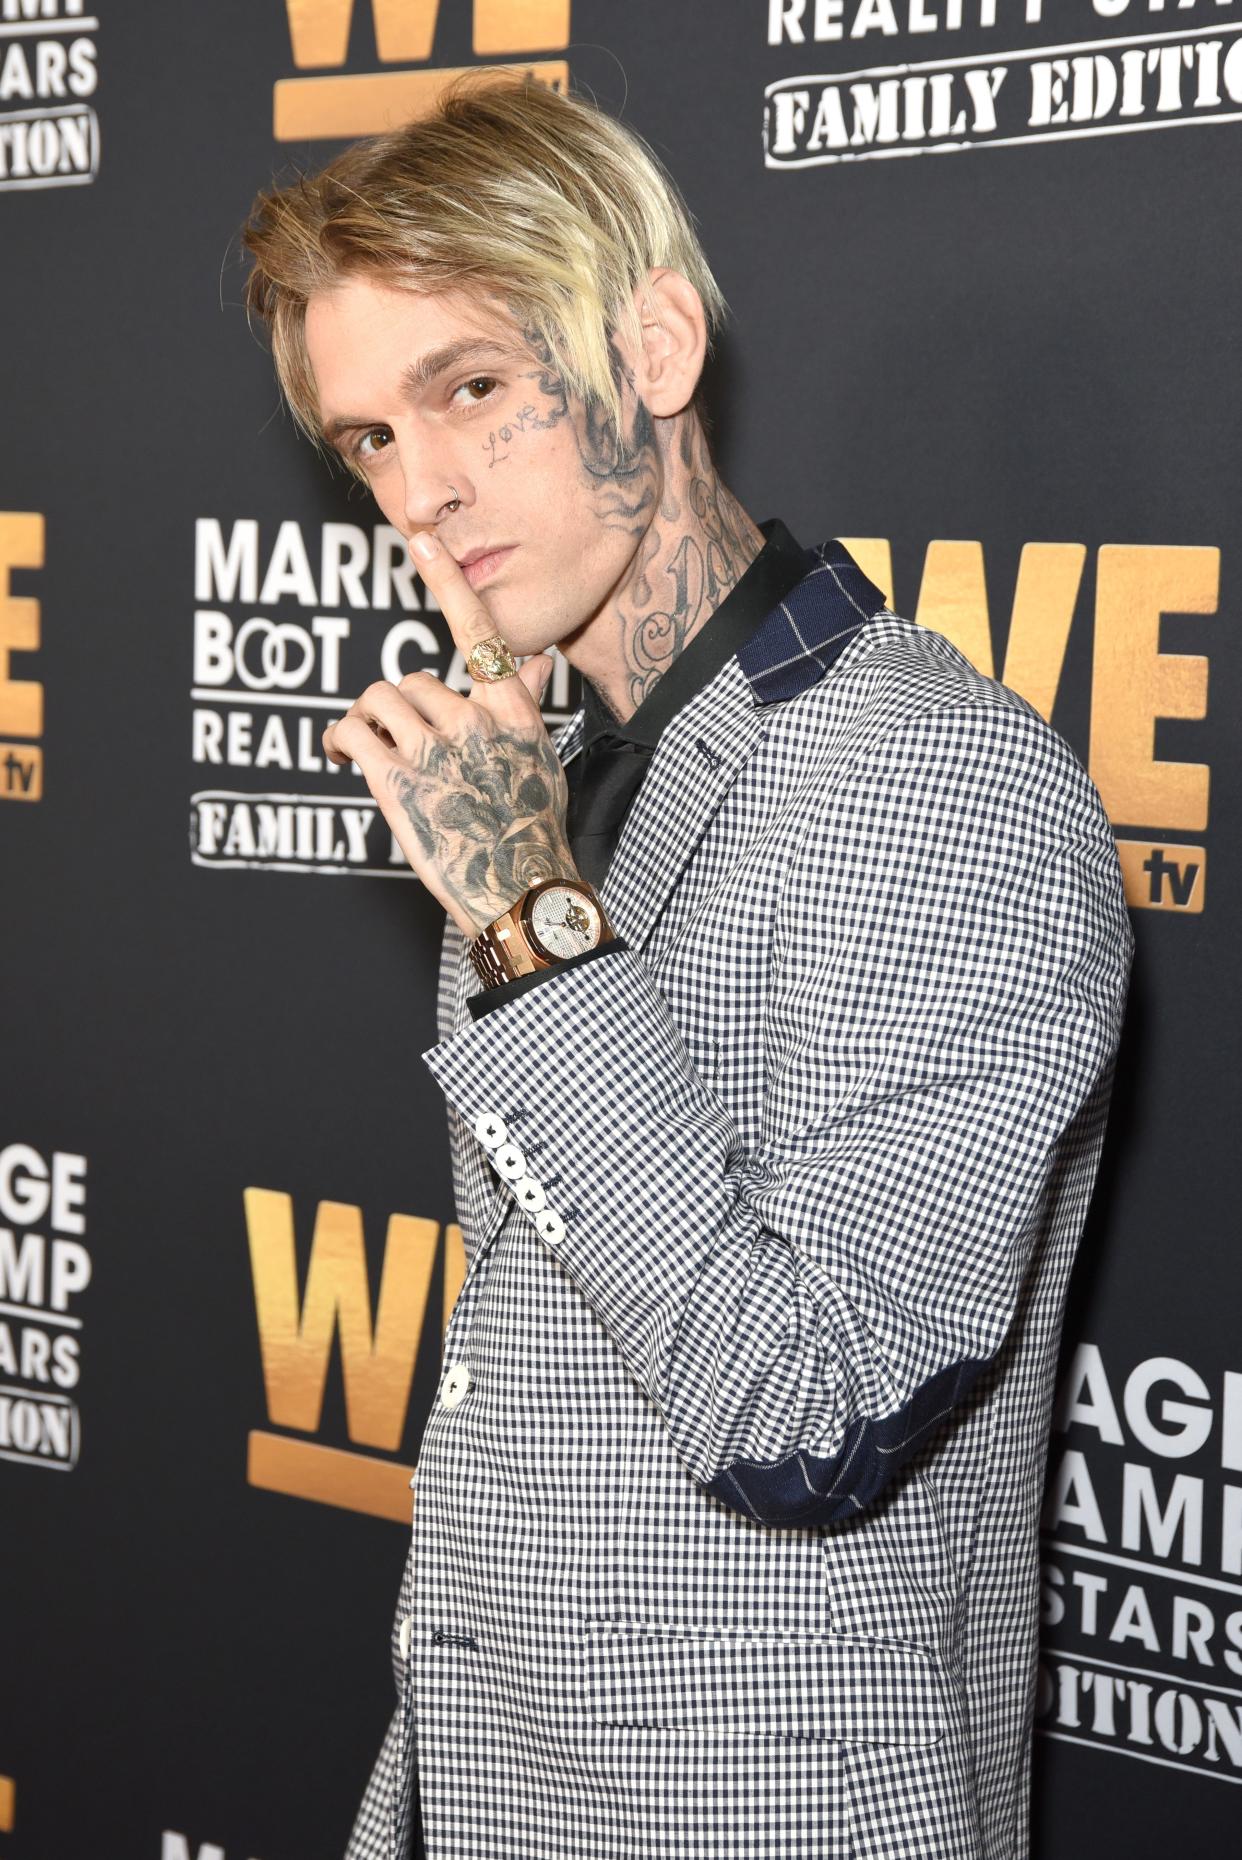 Music that Aaron Carter, seen here in 2019, had been working on at the time of his death will be released in May.